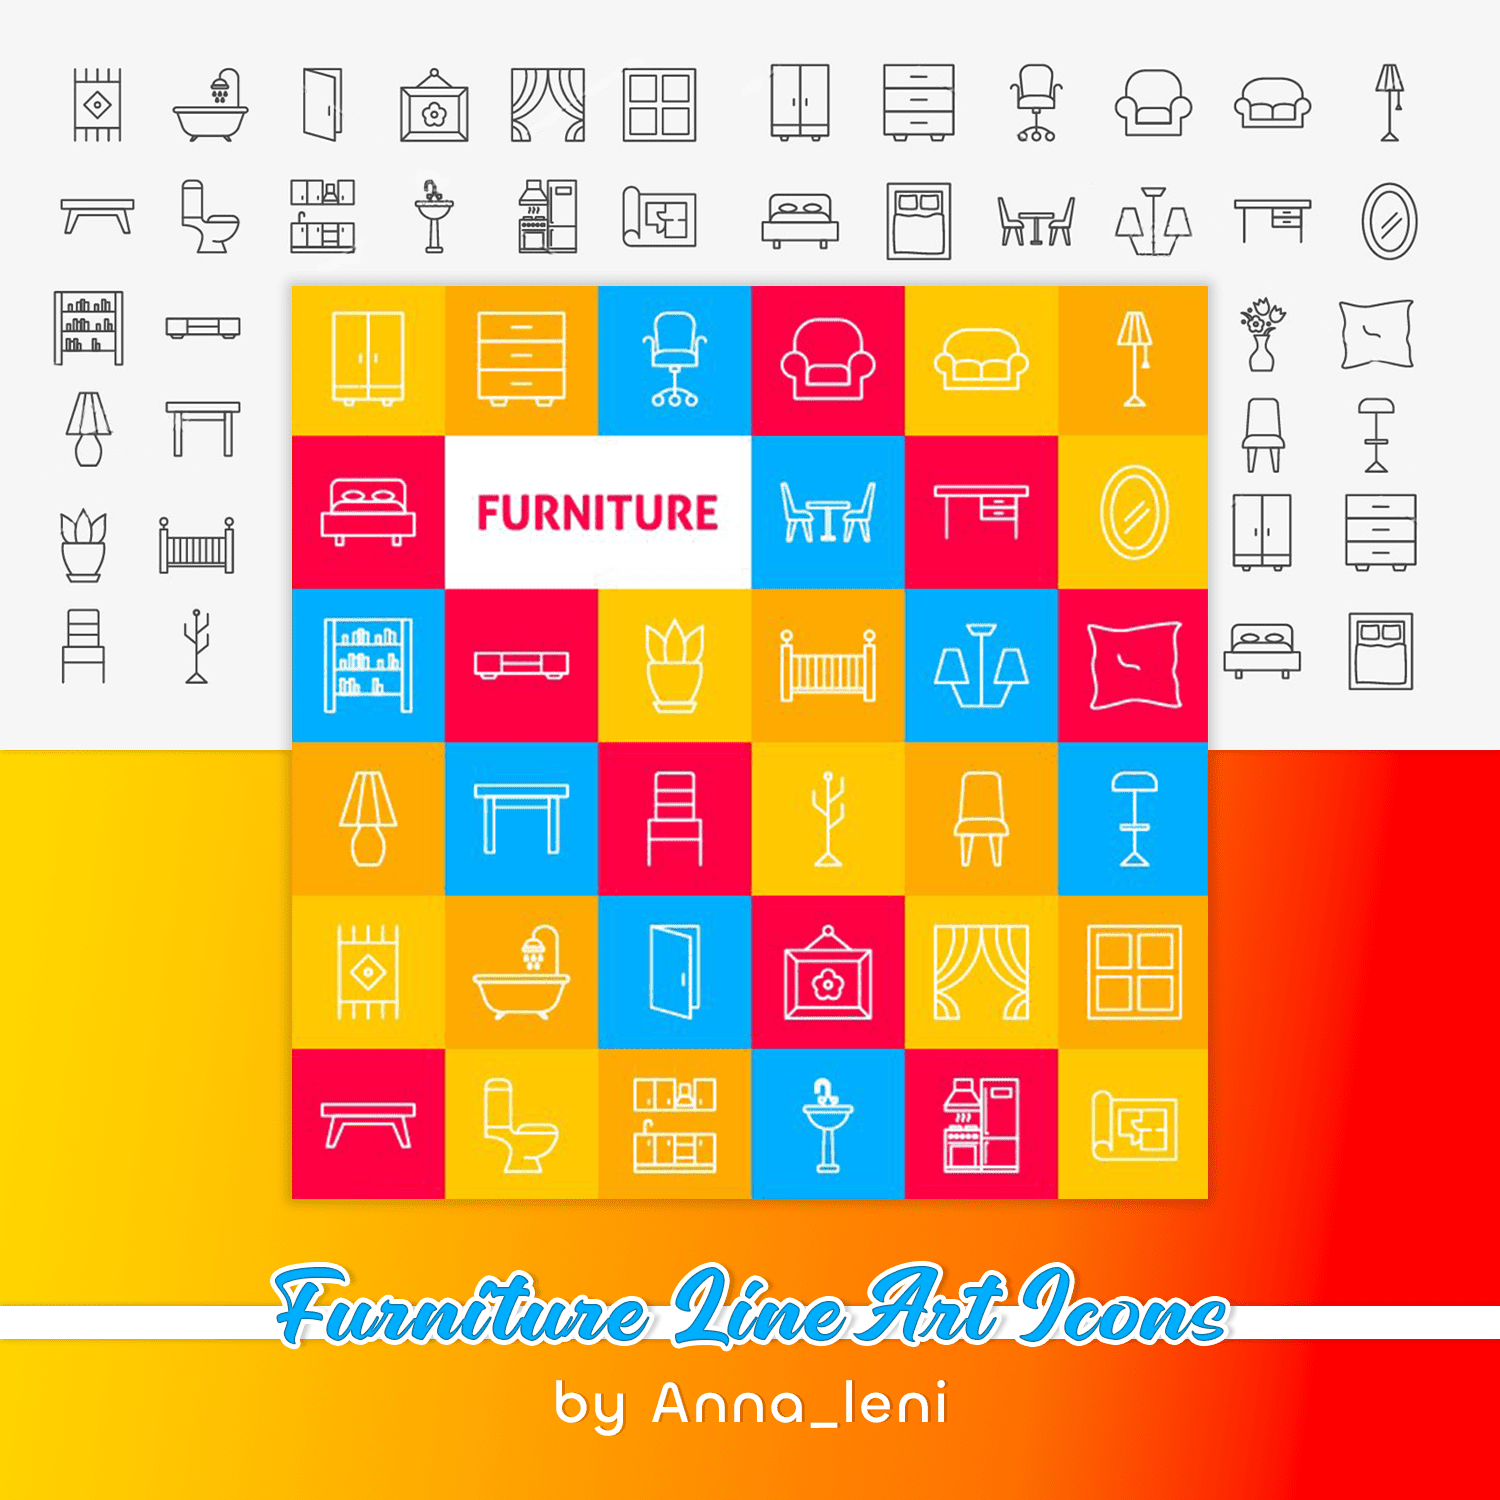 Furniture Line Art Icons cover.